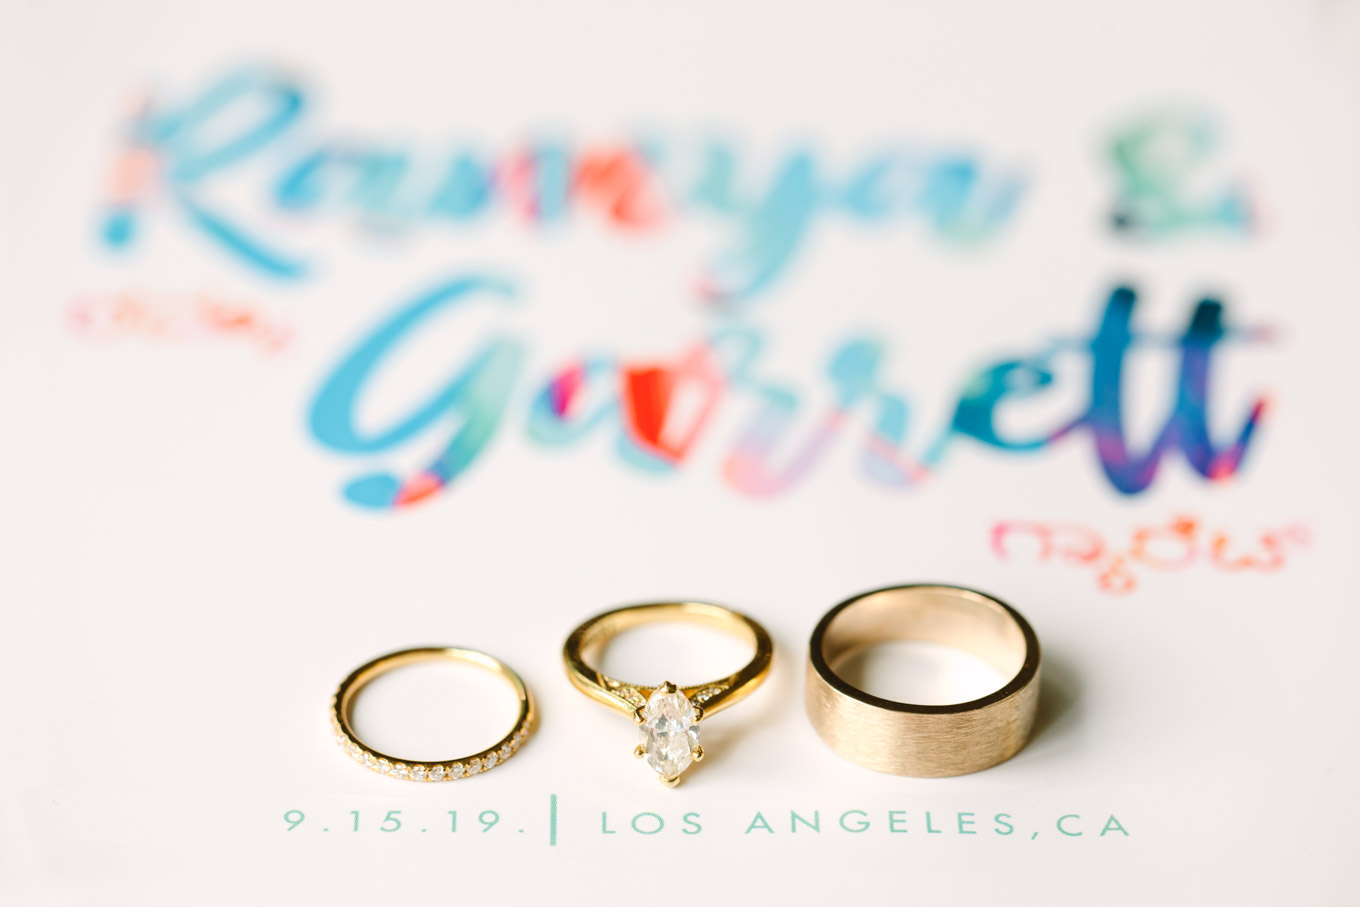 Classic gold wedding rings. Two Disney artists create a unique and colorful Indian Fusion wedding at The Fig House Los Angeles, featured on Green Wedding Shoes. | Colorful and elevated wedding inspiration for fun-loving couples in Southern California | #indianwedding #indianfusionwedding #thefighouse #losangeleswedding   Source: Mary Costa Photography | Los Angeles